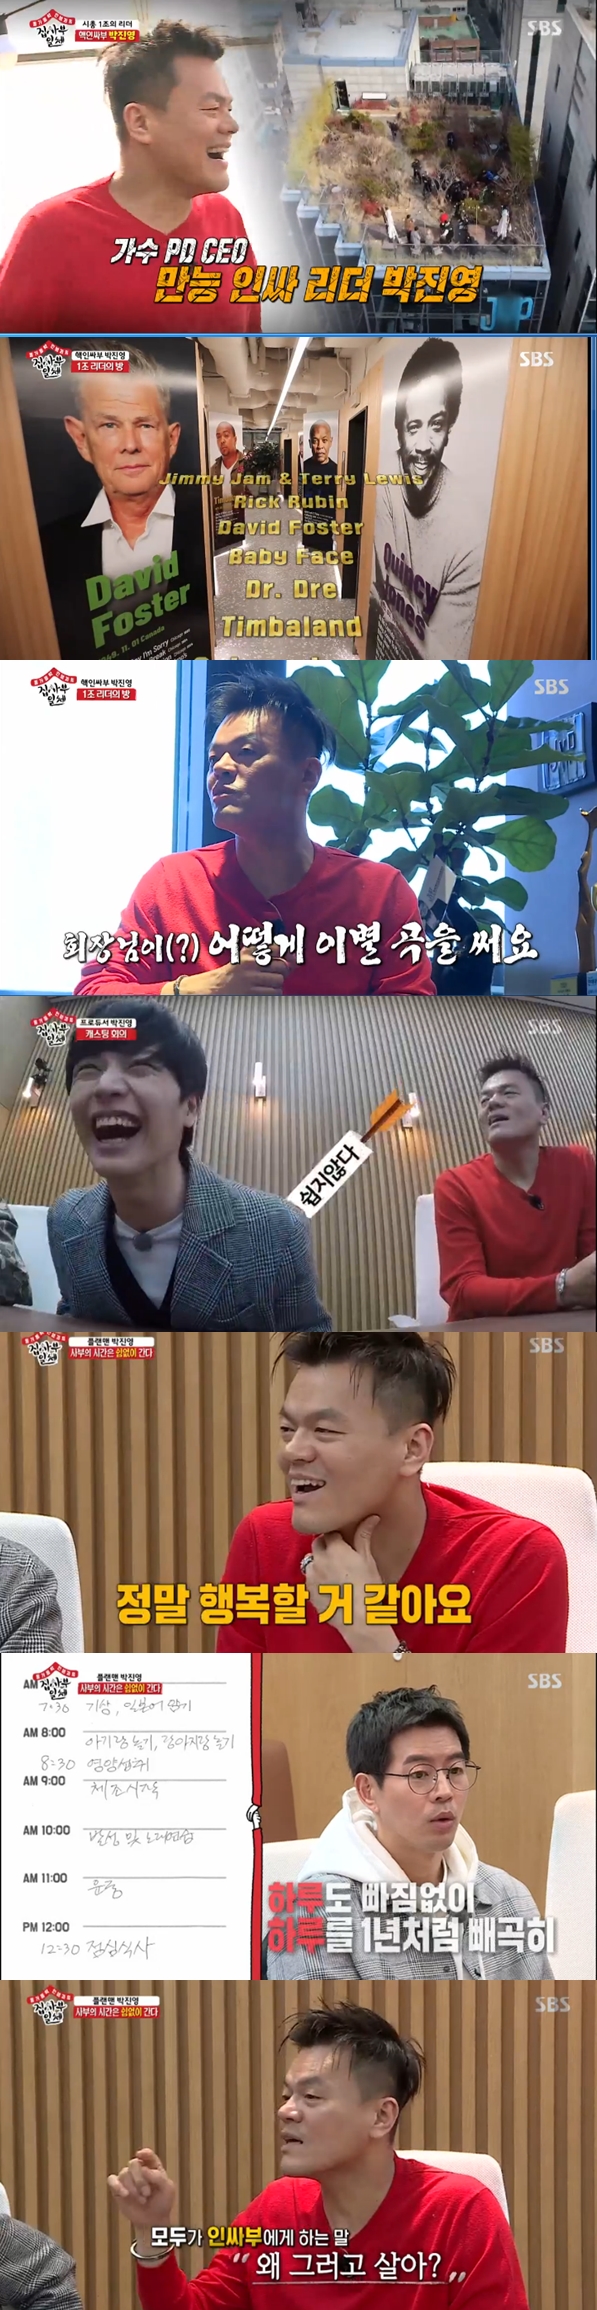 J. Y. Park was busy because of his dream.In the SBS entertainment program All The Butlers broadcasted on the afternoon of the 10th, JYP J. Y. Park sent Haru with me and the members as a new master.The members, under the direction of the new master, wore eye patches and headed to the appointment place; the members, who arrived at the appointment place with difficulty, blindfolded, wondered about the new master.For the members who were curious, Rain appeared as a hint fairy; he said of the new master, Im an innovator, and makes people tired to make something new.People call the master PD and I am a teacher, he said. The members learned about the master.The new master was JYP J. Y. Park.Rain said of J. Y. Park that he wanted to be incense for life, and J. Y. Park appeared before the members, dancing like a self-proclaimed person.Lee Seung-gi said, It is the best person I know.J. Y. Park introduced his new company to the members and revealed his life view.J. Y. Park, who liked to have his room in 20 years, said, Honestly, this place is too big for me.Lee Seung-gi said, Honestly, this place seems a little small as a representative room, J. Y. Park said, Honestly my title is the chairman.But I do not want to be called president. He said, I do not think I can write a song when I am called president. He said, I want to be different for the rest of my life. J. Y. Park then took the members to the cafeteria.The place I want to boast the most is the cafeteria, he said. I can only use the staff, but I will take it special today. The members admired the cafeteria menu.The members shouted It is a big hit and filled the plate with delicious food.However, to the members who eat rice, J. Y. Park said, Eat it today, and the members began to worry about it.After eating, J. Y. Park hurt him again when he watched a video of Yook Sungjae auditioning JYP in the past.J. Y. Park, who didnt know that Yook Sungjae auditioned, said it was not easy when he saw the video; he laughed when he said the best issue is the head.Yang Se-hyeong asked, Is appearance important, not personality? And embarrassed J. Y. Park.However, J. Y. Park said his taste firmly, saying, It is sophisticated or has a good style for that age.On the other hand, J. Y. Park, who cherishes 1 minute and 1 second, looked serious when he saw the members rest schedule.J. Y. Park, who left the evaluation of I think I will be happy when I saw Lee Sang-yoons schedule, who thought he would spend the most leisurely time, sighed when he saw the timetable of Yook Sungjae.Yook Sungjaes routine ended with an animated view; even after seeing the timetables of Lee Seung-gi and Yang Se-hyeong that followed, he could not hide his serious expression.Eventually, he revealed his timetable, saying, Why am I going to be hard?J. Y. Parks timetable was cut in half-hours; he began Haru, memorizing Japanese sentences from the weather.J. Y. Park explained the importance of morning time, saying, Two-thirds of my hit songs are right after the weather. His daily schedule was written to the toilet time, which surprised the members.The members found that there was no dinner after seeing the masters schedule, and J. Y. Park declared, I only eat dinner three times a week, he said.J. Y. Park said, I was surprised that others were not living like me.Lee Seung-gi looked at the masters breathtaking planner and asked, So is the master the happiest when he is busy? And then J. Y. Park laughed happily.The reason I live in a busy life is because of my dream, he said. My dream is to let me know after I spend Haru together.J. Y. Park, who brought members to the practice room to share his daily life, made an extraordinary proposal.He said, I will give the food to the person who heard the first syllable and the song, and the members enthusiastically answered the correct answer.From the lies of GOD to the how to avoid the sun of rain, the top songs were the problems, and the members were right.To Nola J. Y. Park, Yang Se-hyeong expressed his respect to him, saying, The first song is enough for a single piece.